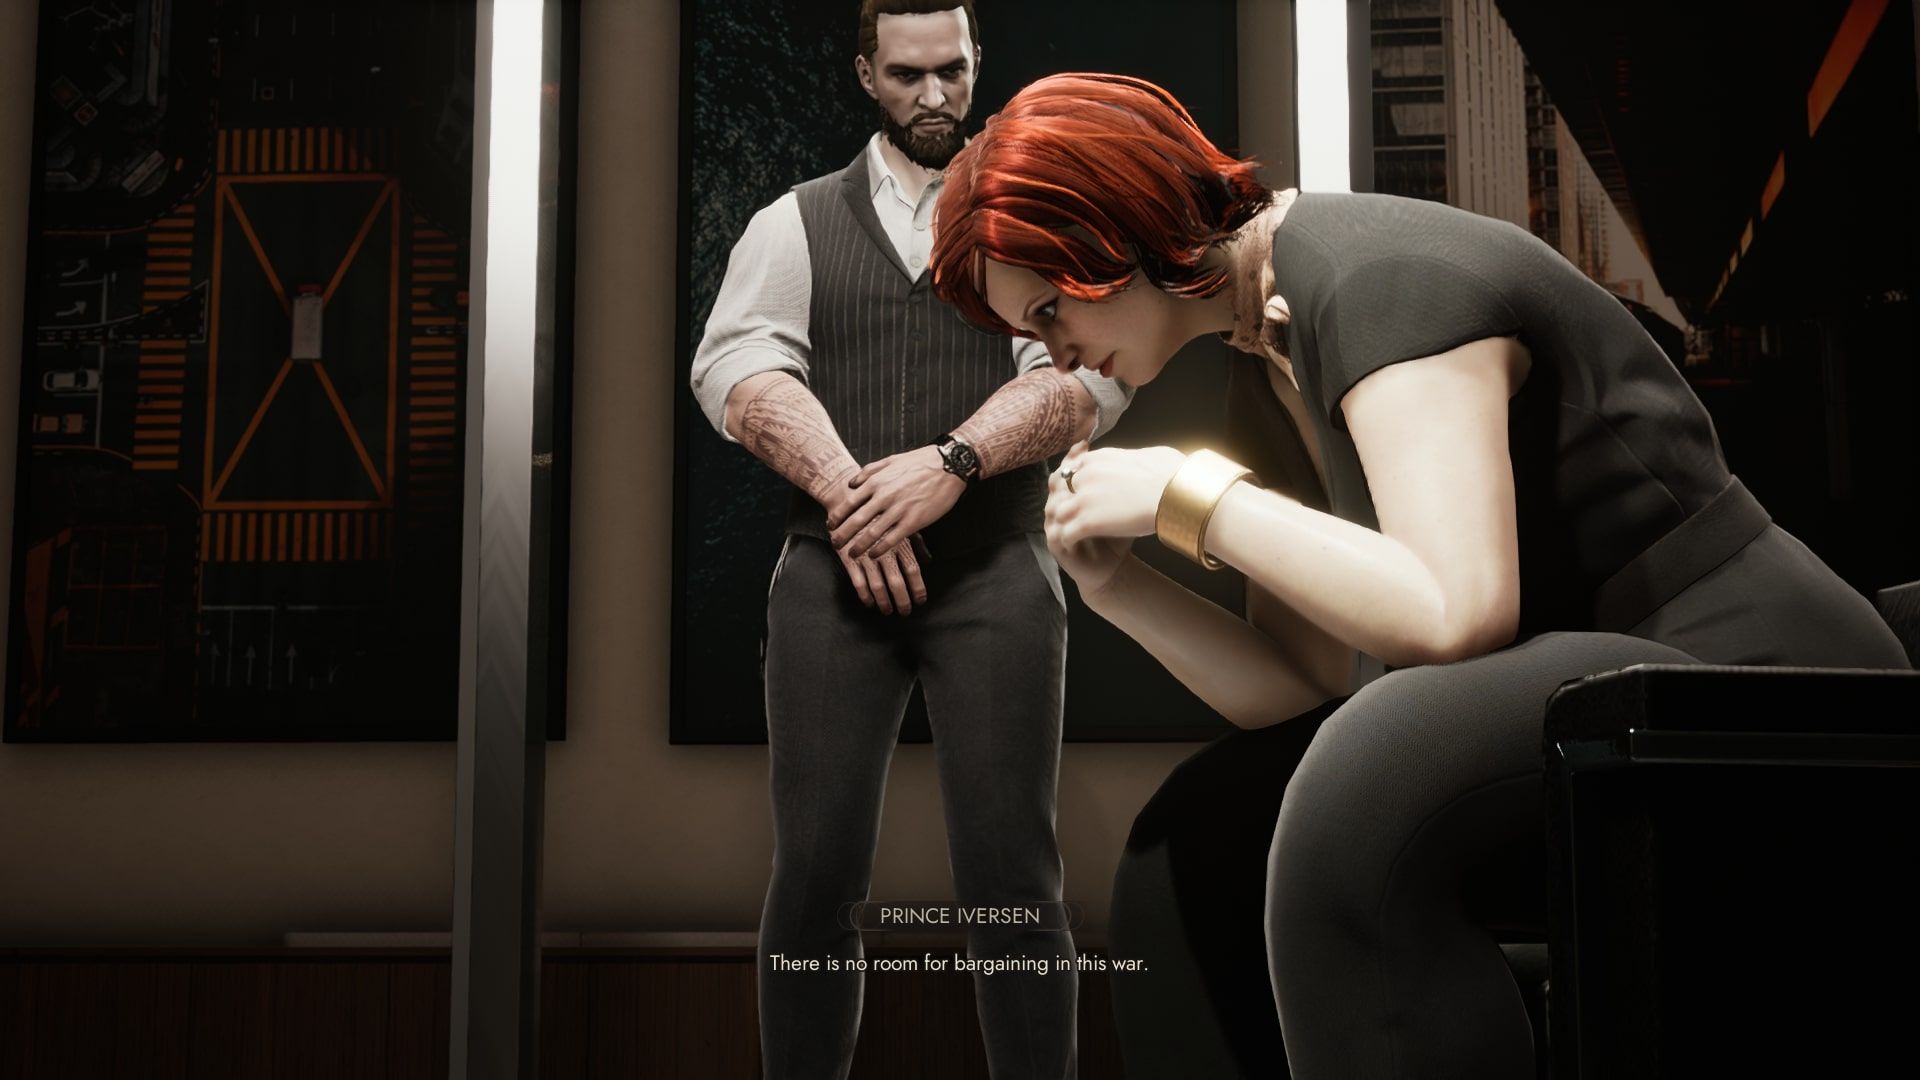 Vampire: The Masquerade - Swansong Hilda being arrested by Iverson's bodyguard